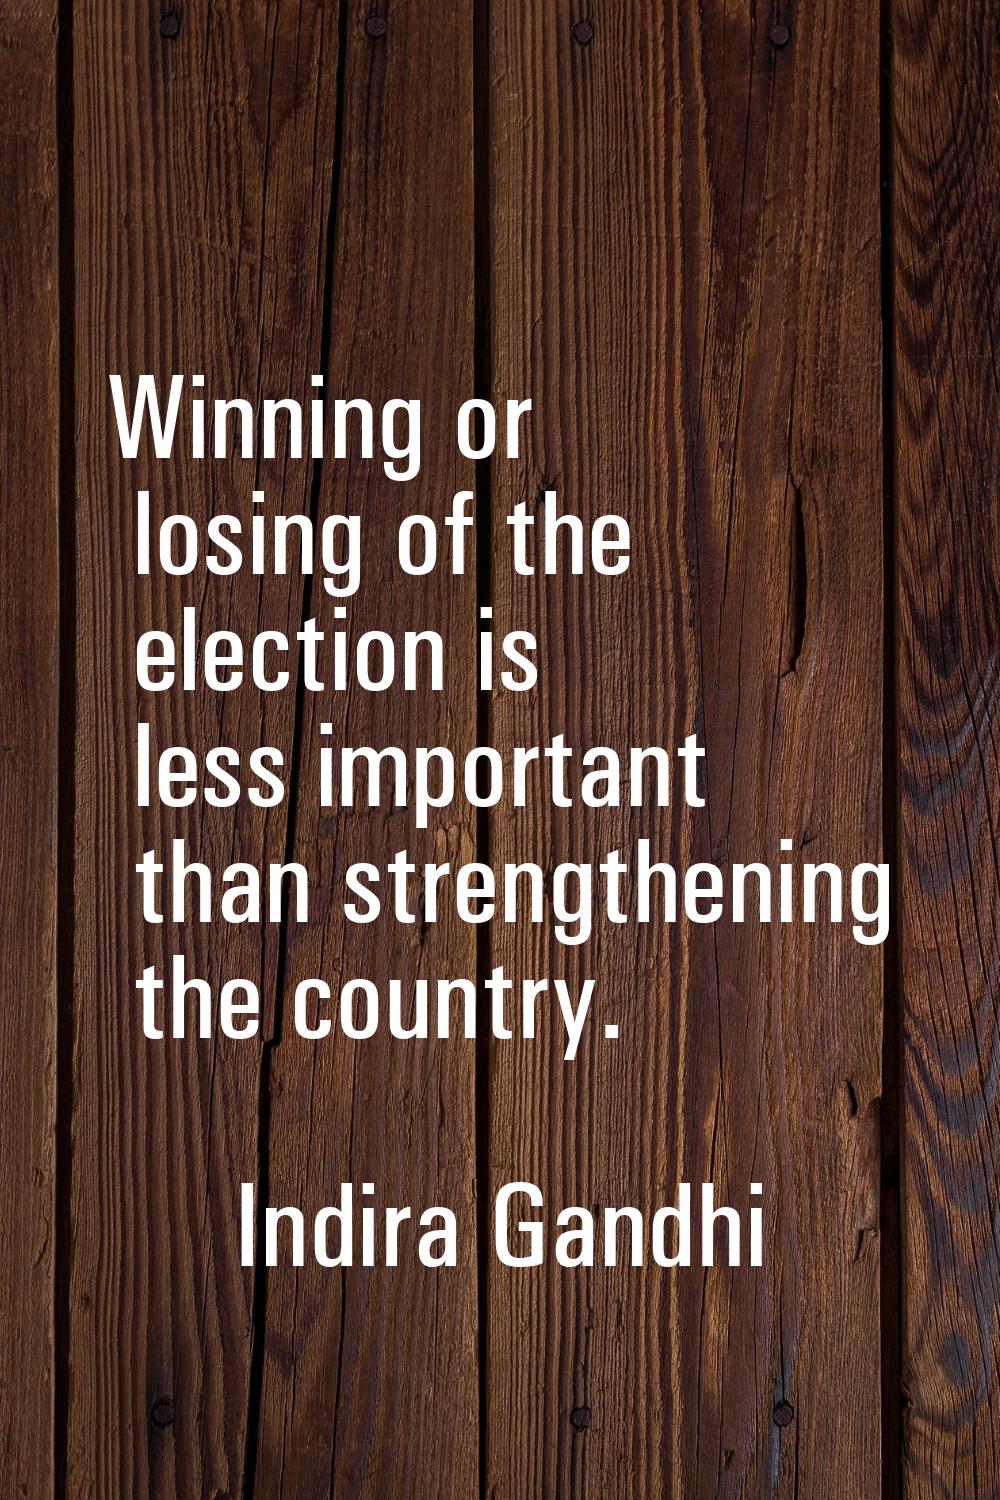 Winning or losing of the election is less important than strengthening the country.